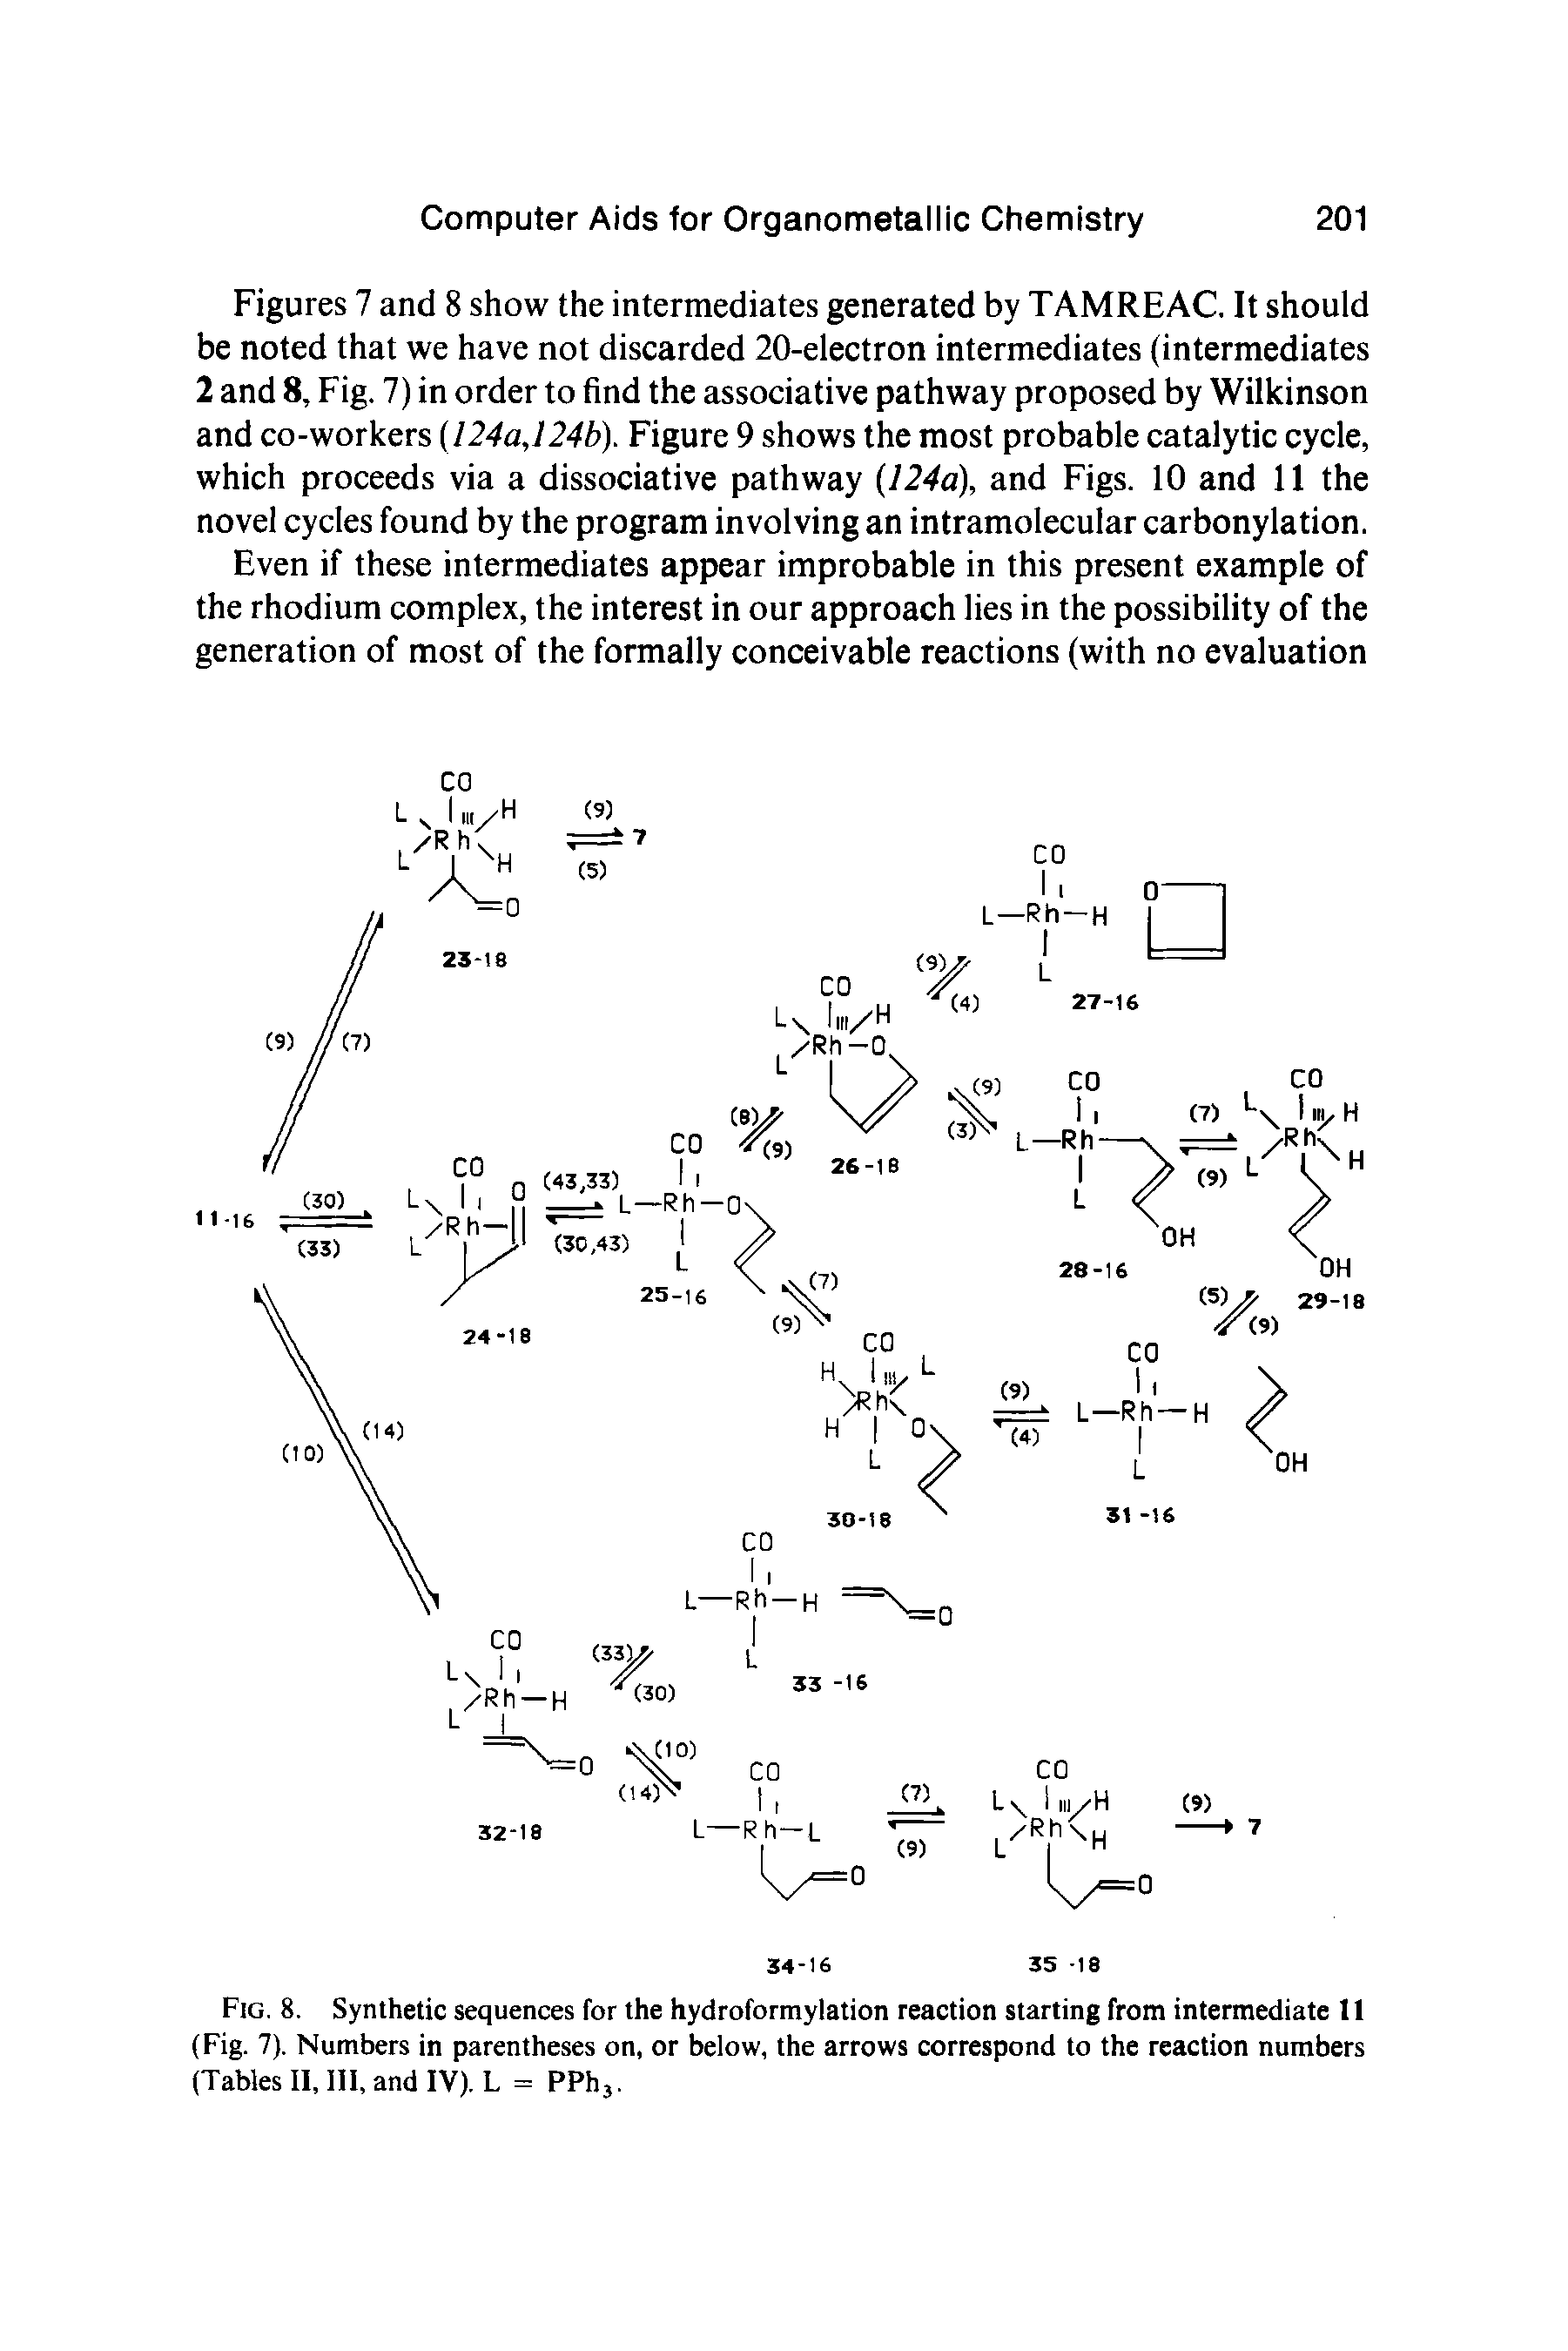 Figures 7 and 8 show the intermediates generated by TAMREAC. It should be noted that we have not discarded 20-electron intermediates (intermediates 2 and 8, Fig. 7) in order to find the associative pathway proposed by Wilkinson and co-workers (124a,124b). Figure 9 shows the most probable catalytic cycle, which proceeds via a dissociative pathway (124a), and Figs. 10 and 11 the novel cycles found by the program involving an intramolecular carbonylation.